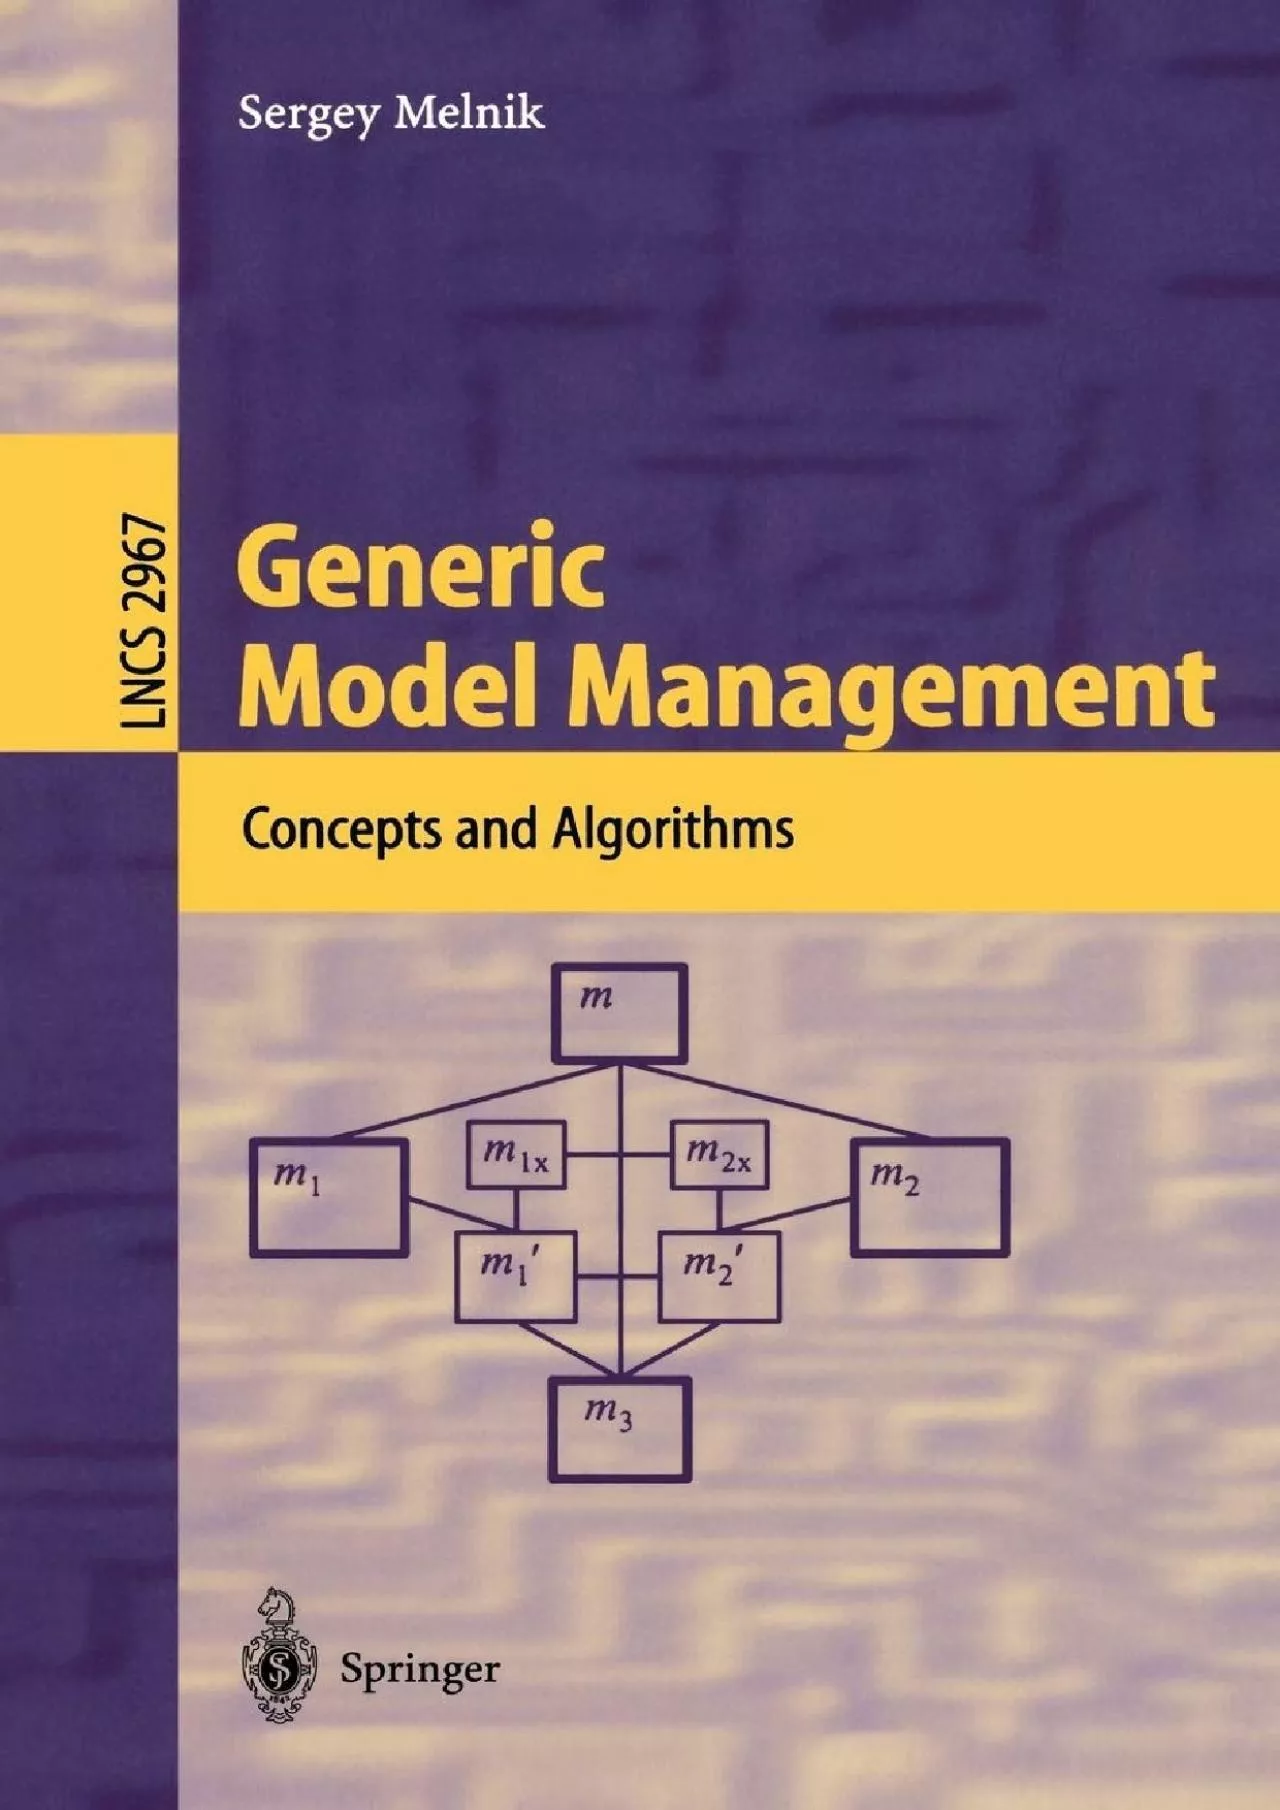 [READING BOOK]-Generic Model Management: Concepts and Algorithms (Lecture Notes in Computer